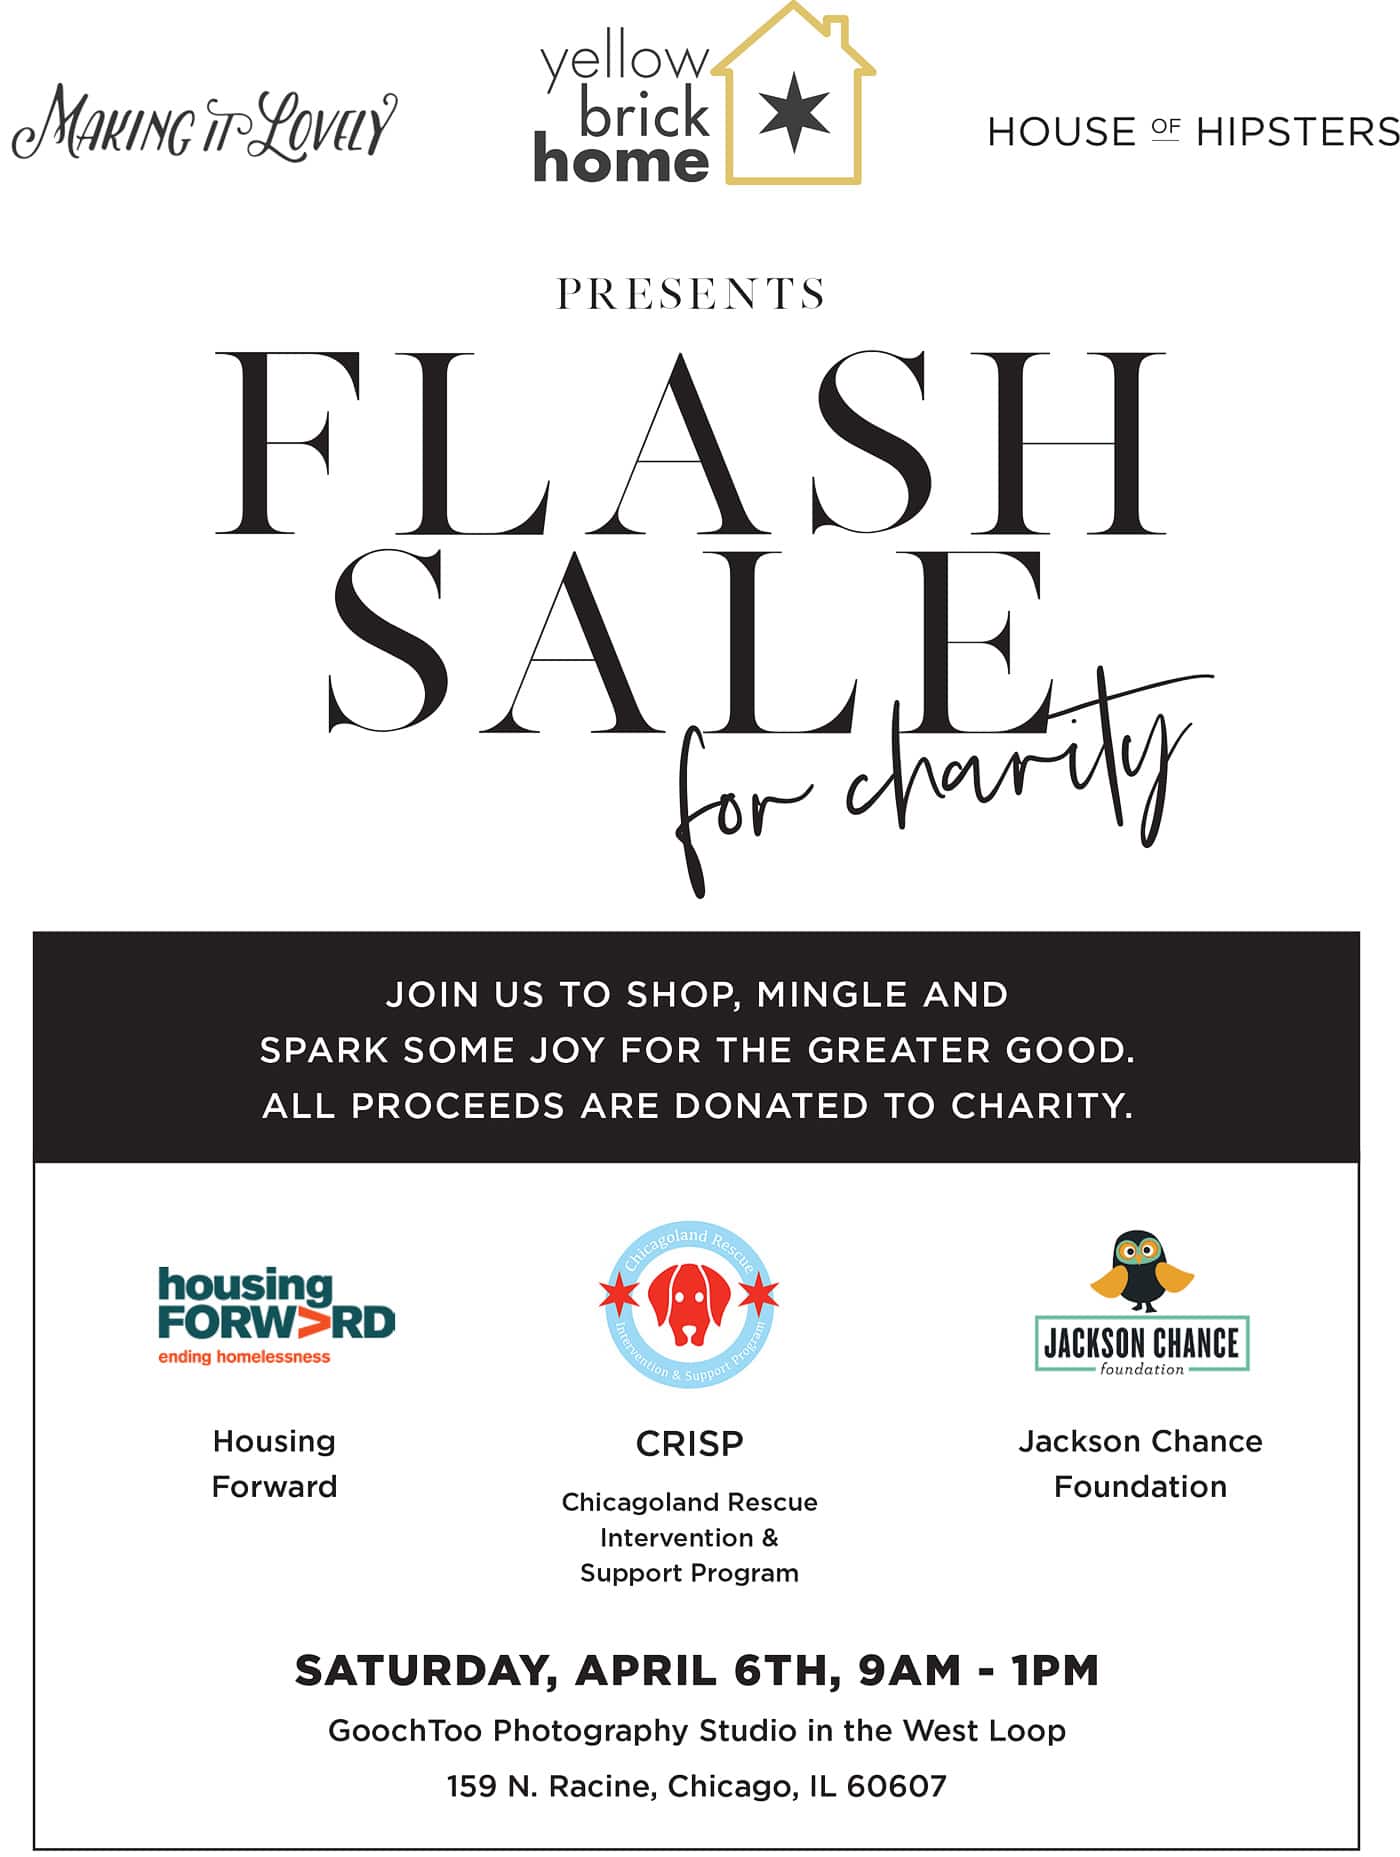 A Flash Sale for charity via Yellow Brick Home | save the date!